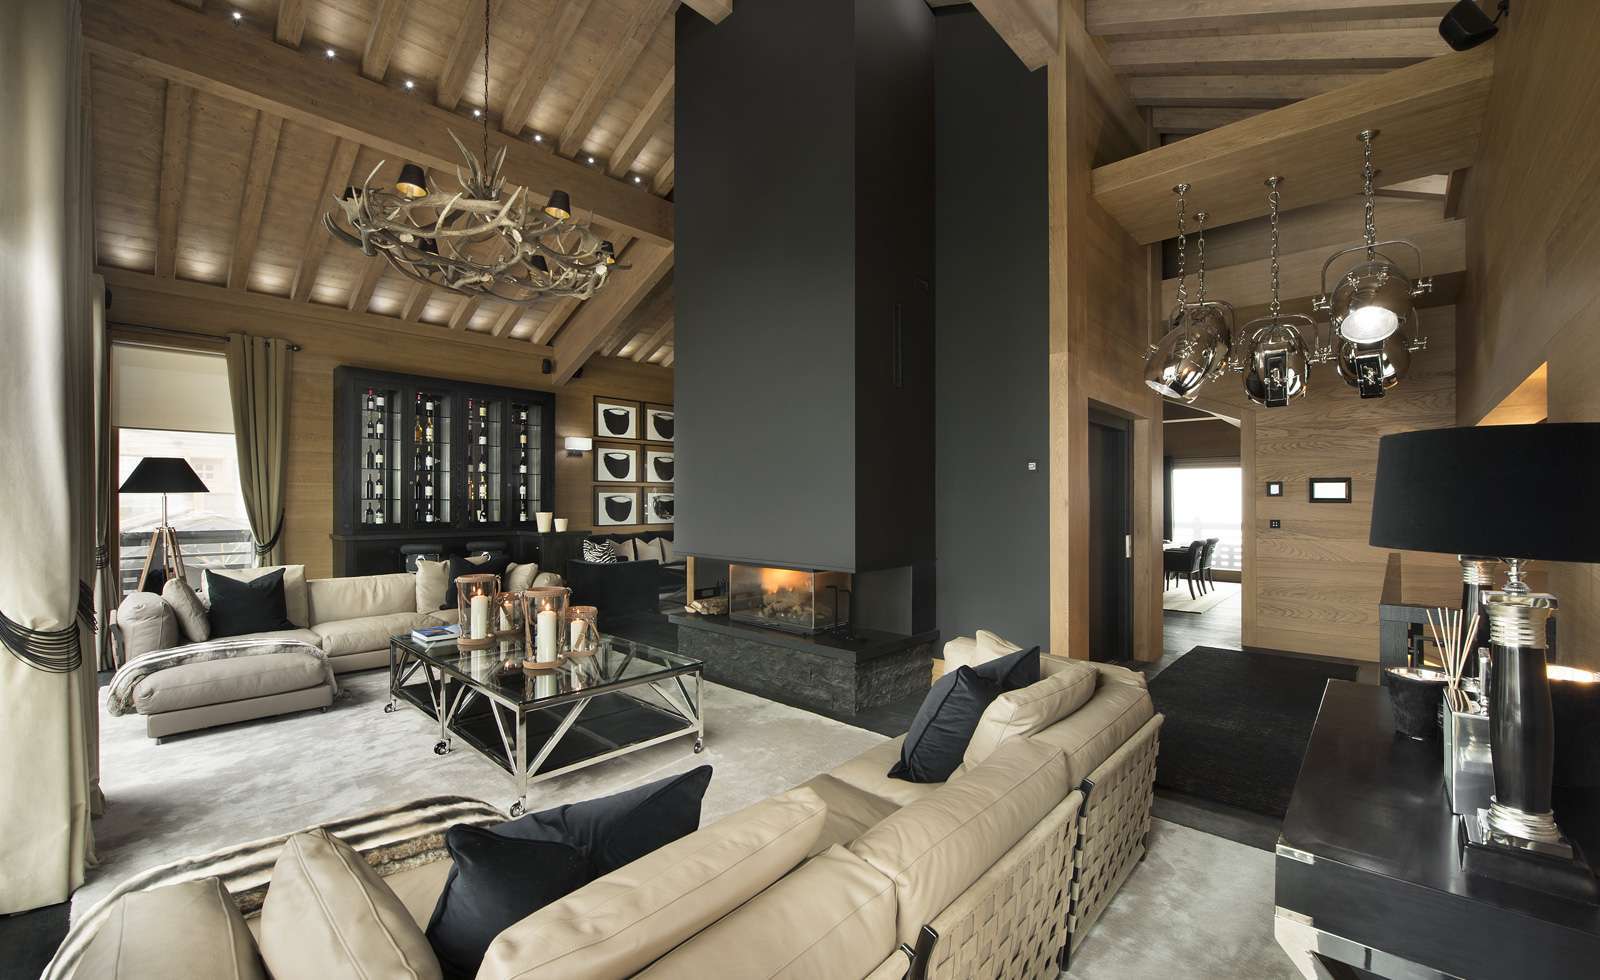 kings-avenue-luxury-chalet-courchevel-009-sitting-room-with-open-fireplace